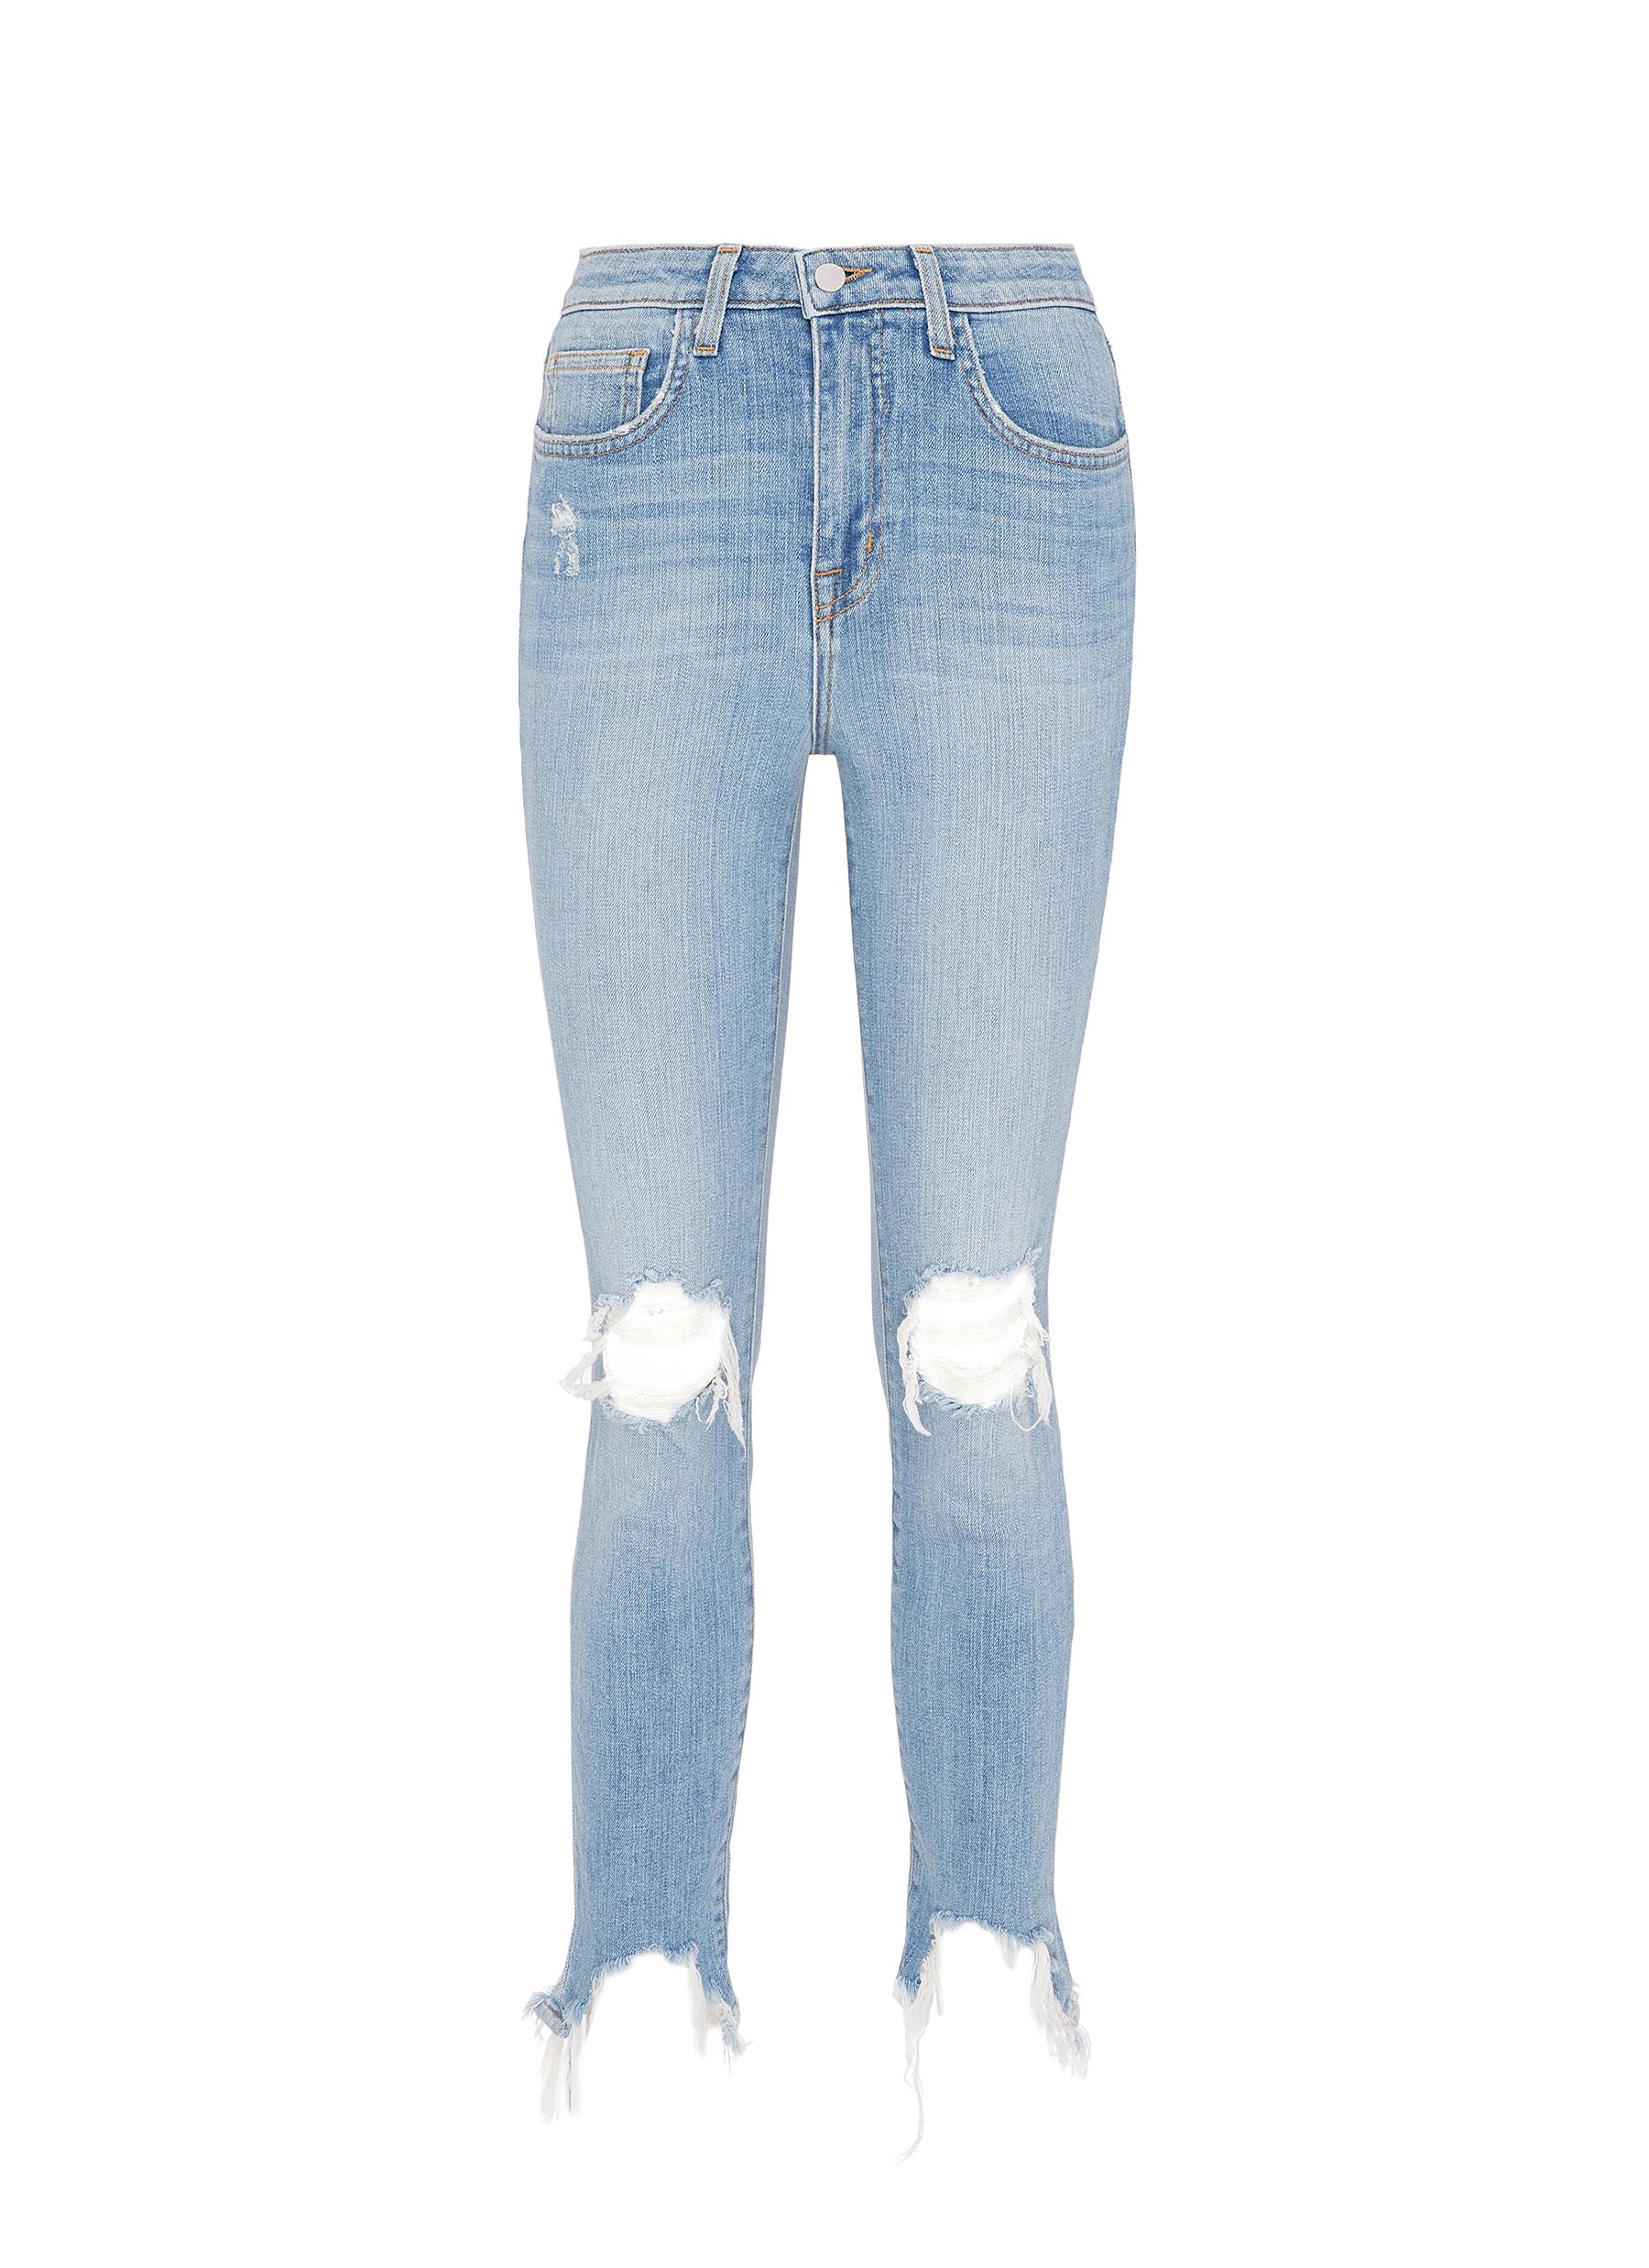 High Line ripped knee skinny jeans by L'Agence